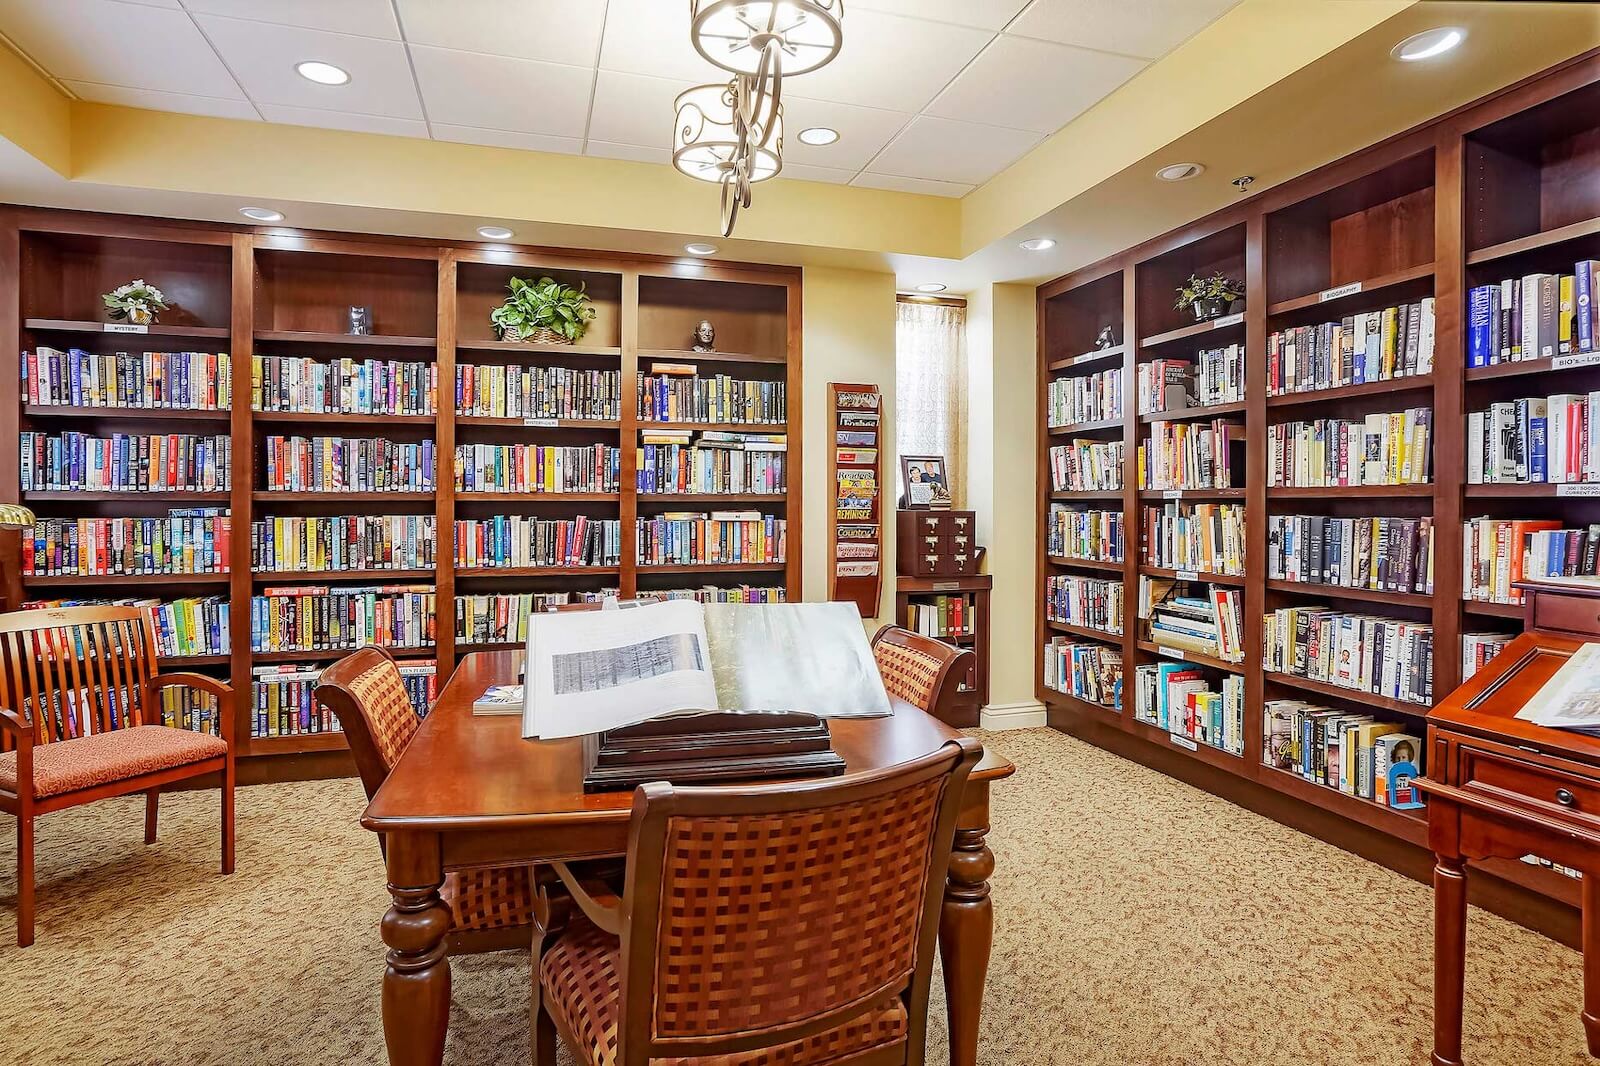 Library with walls of full bookshelves and a table in the middle with a large book